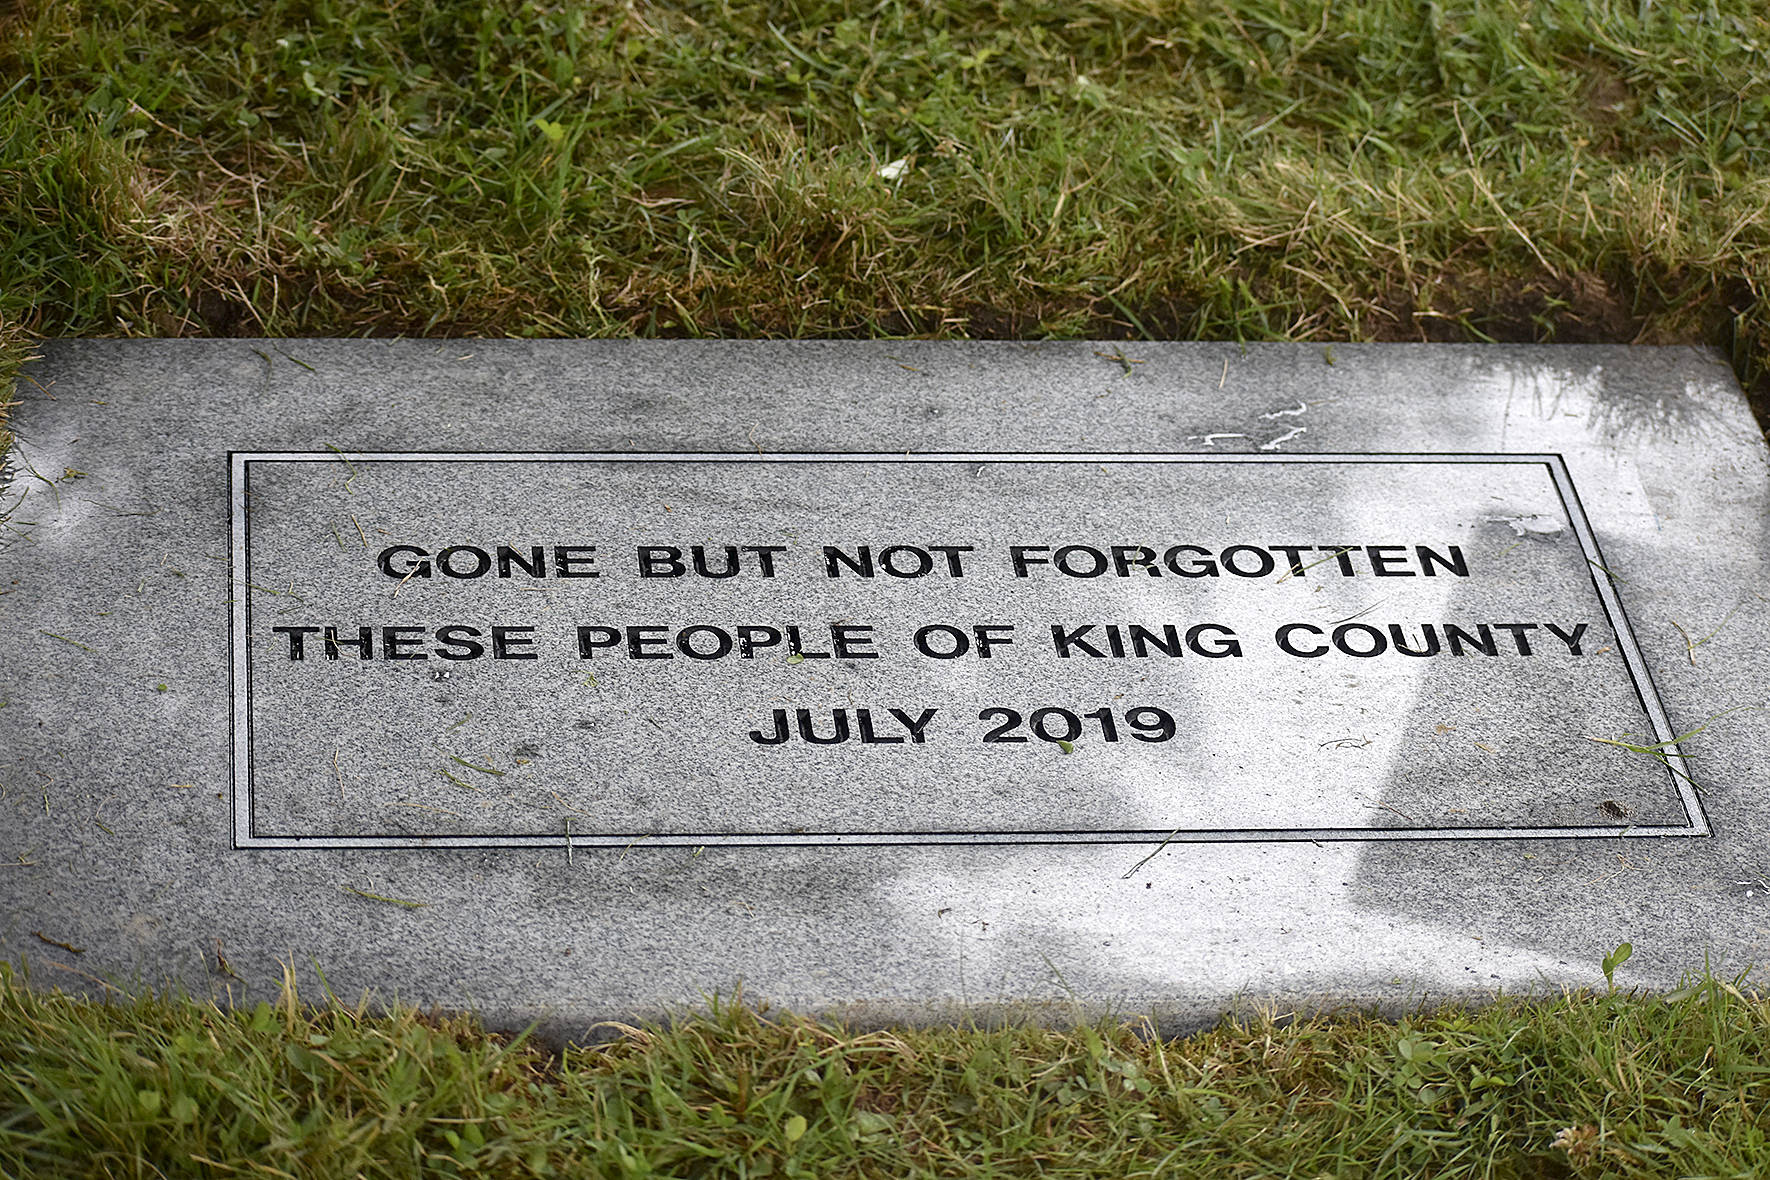 Photo by Haley Ausbun. Hundreds of people who passed away without family to bury them were remembered Wednesday, July 10, at the King County Medical Examiner’s Office Indigent Remains Ceremony at Mount Olivet Cemetery.